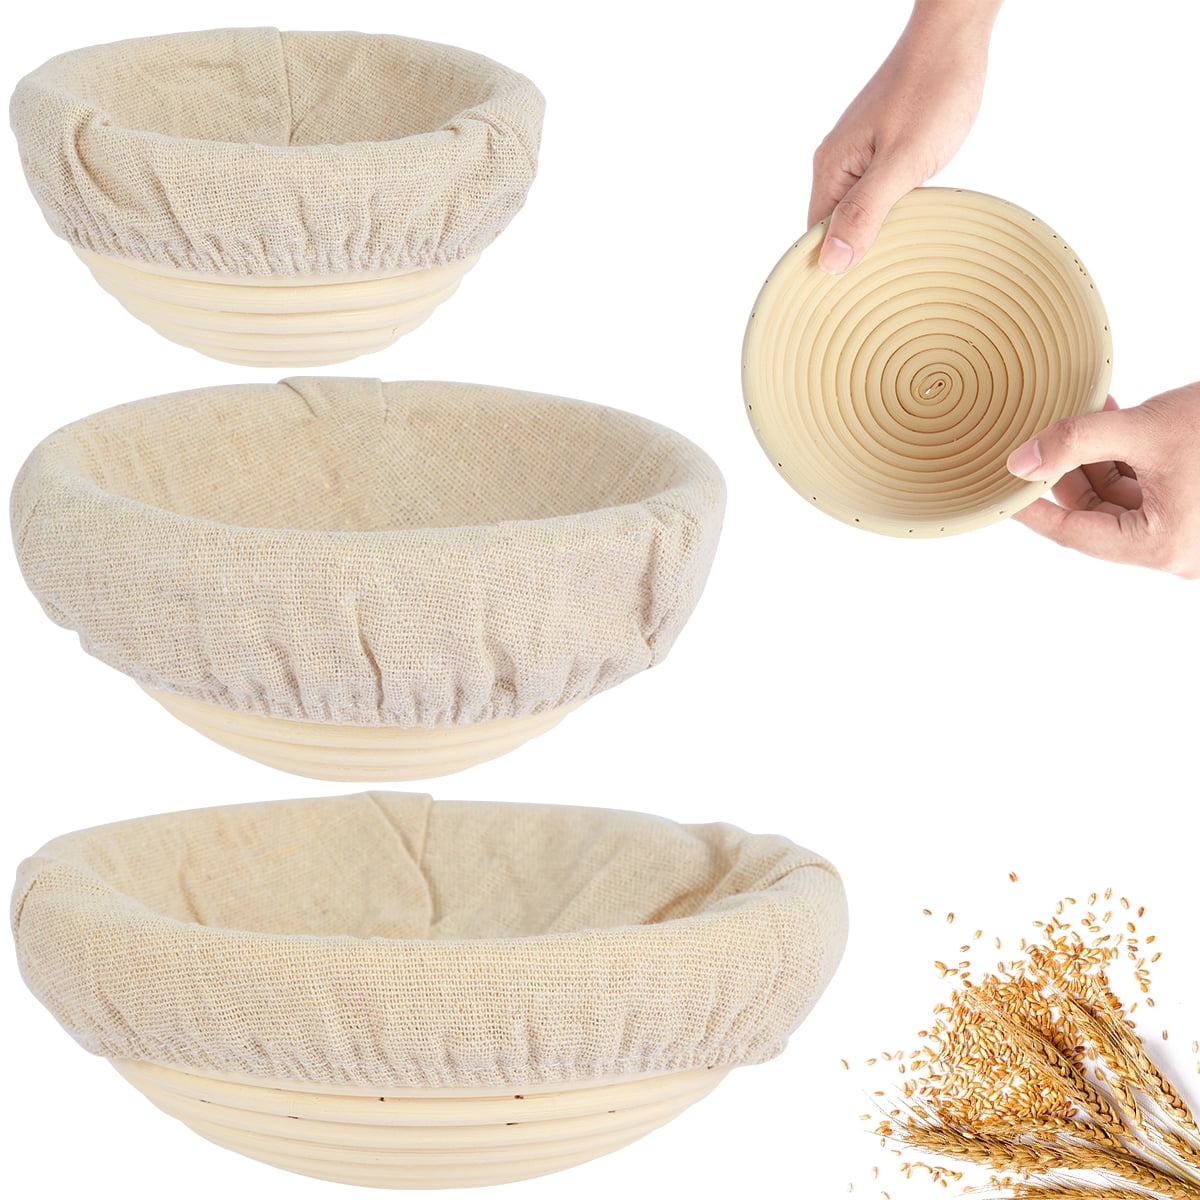 RoEsha Banneton Bread Proofing Basket 23 Piece Set, Round 9 and Oval 10  Inch Rattan Sourdough Baskets with Dough Scraper, Scoring Lame, Linen Bread